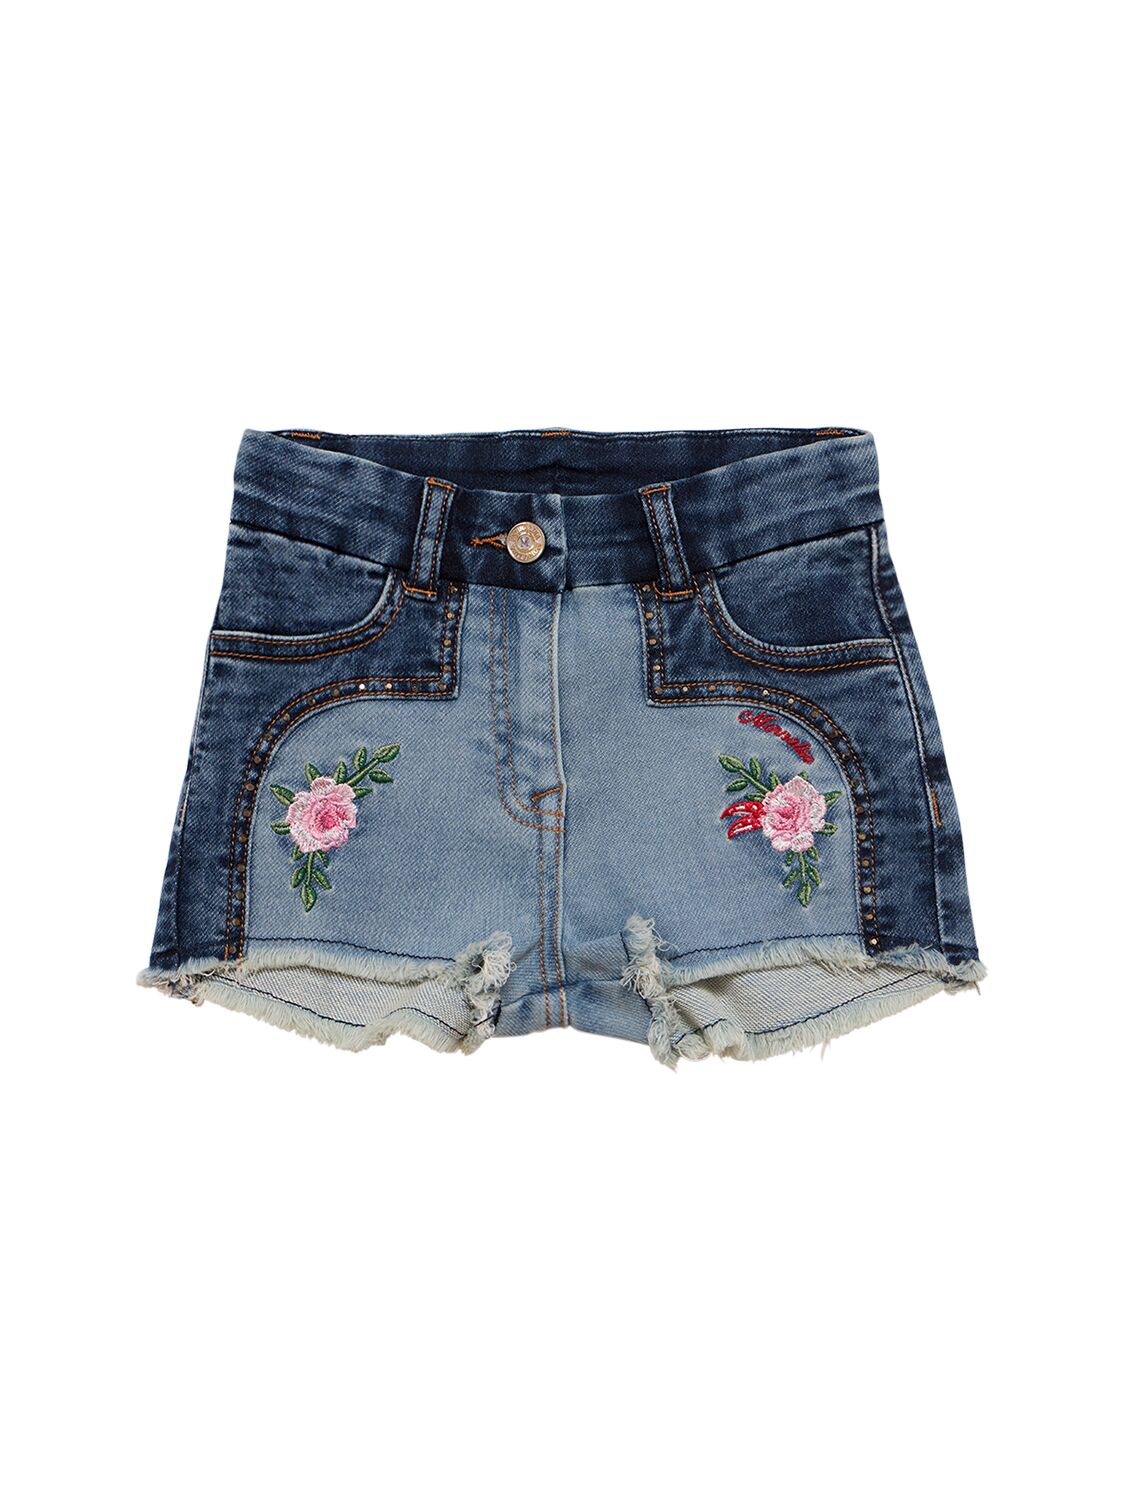 Image of Embroidered Cotton Denim Shorts